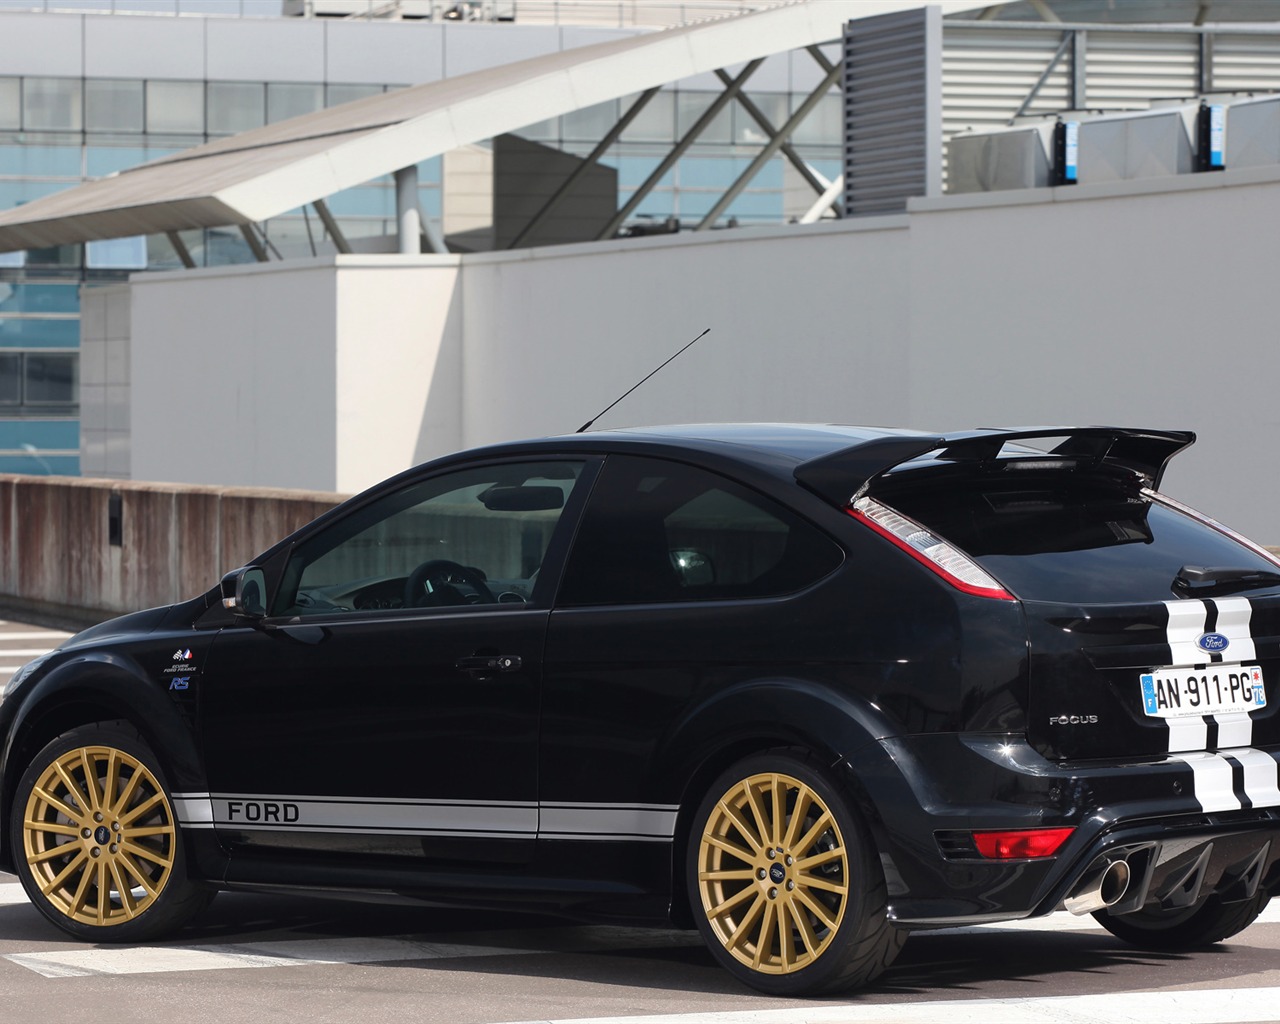 Ford Focus RS Le Mans Classic - 2010 福特 #3 - 1280x1024